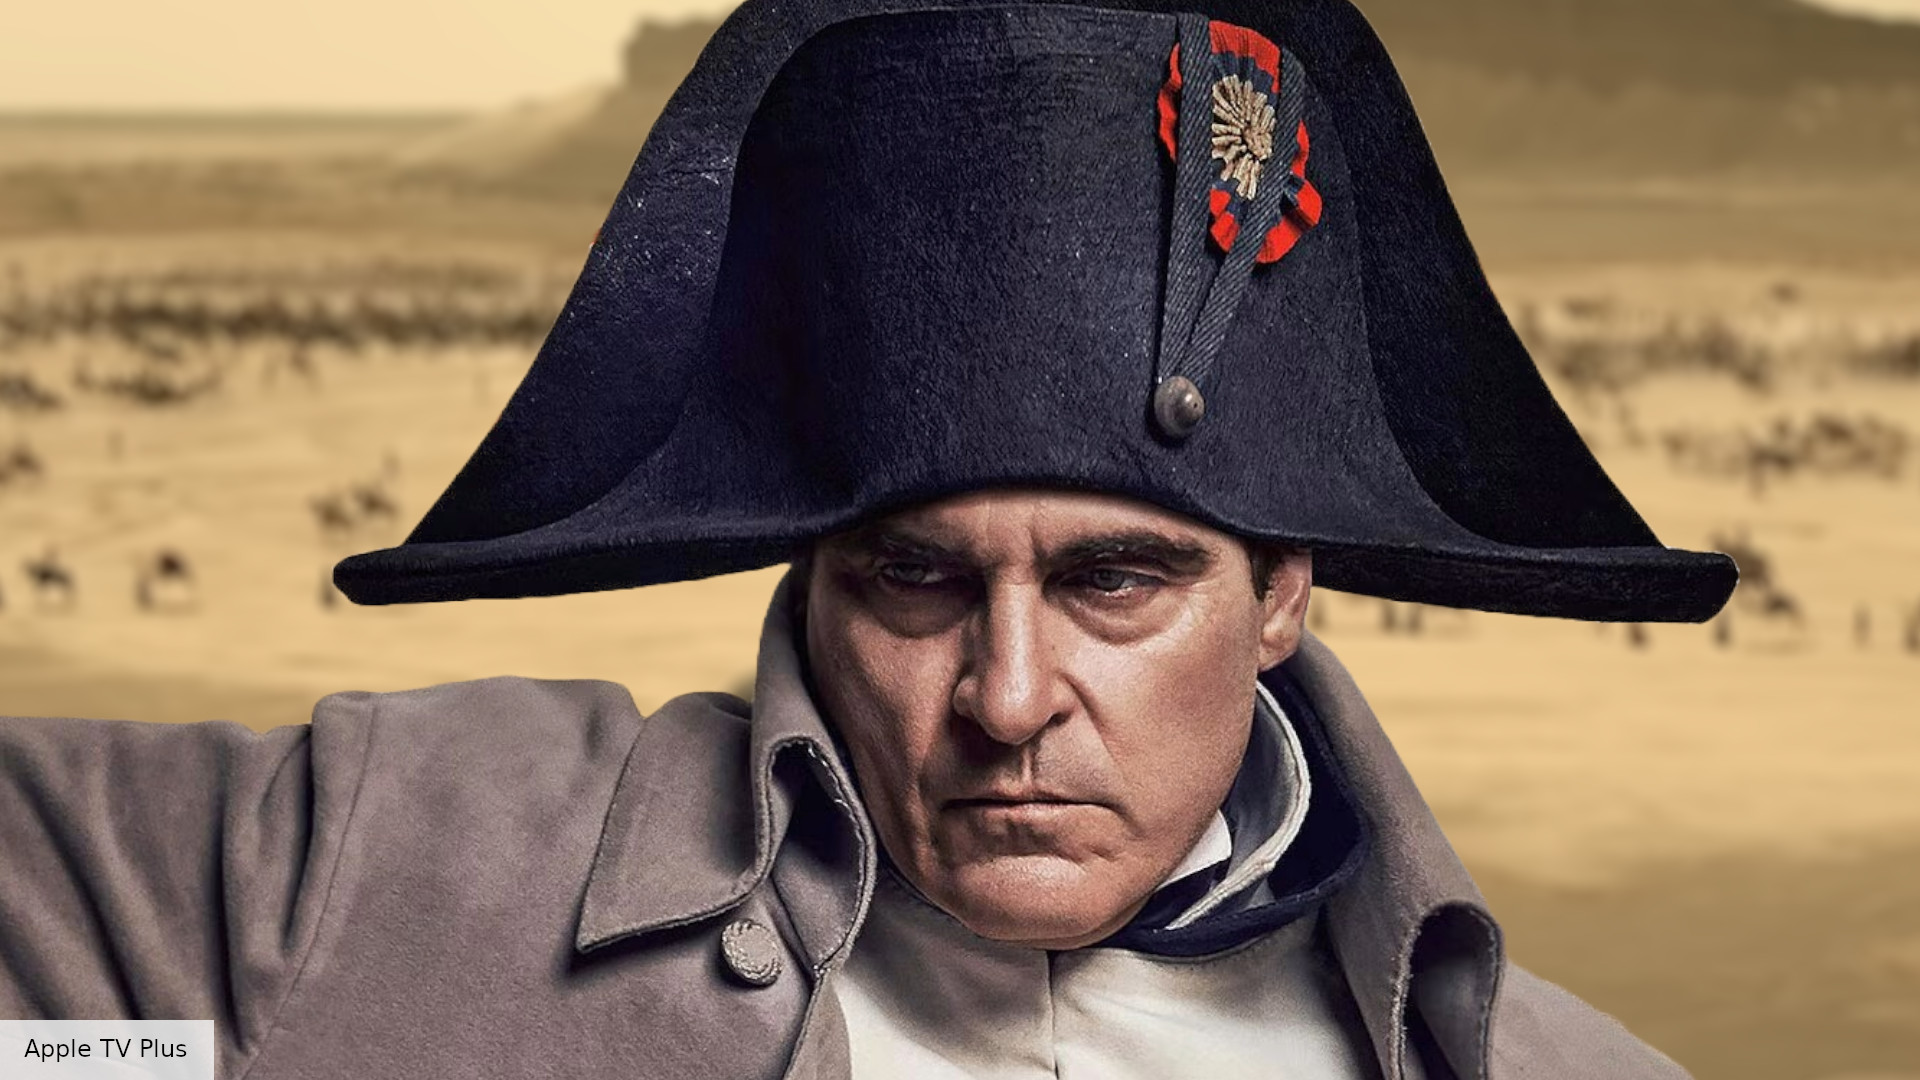 Napoleon cast, trailer, plot, reviews, and more news